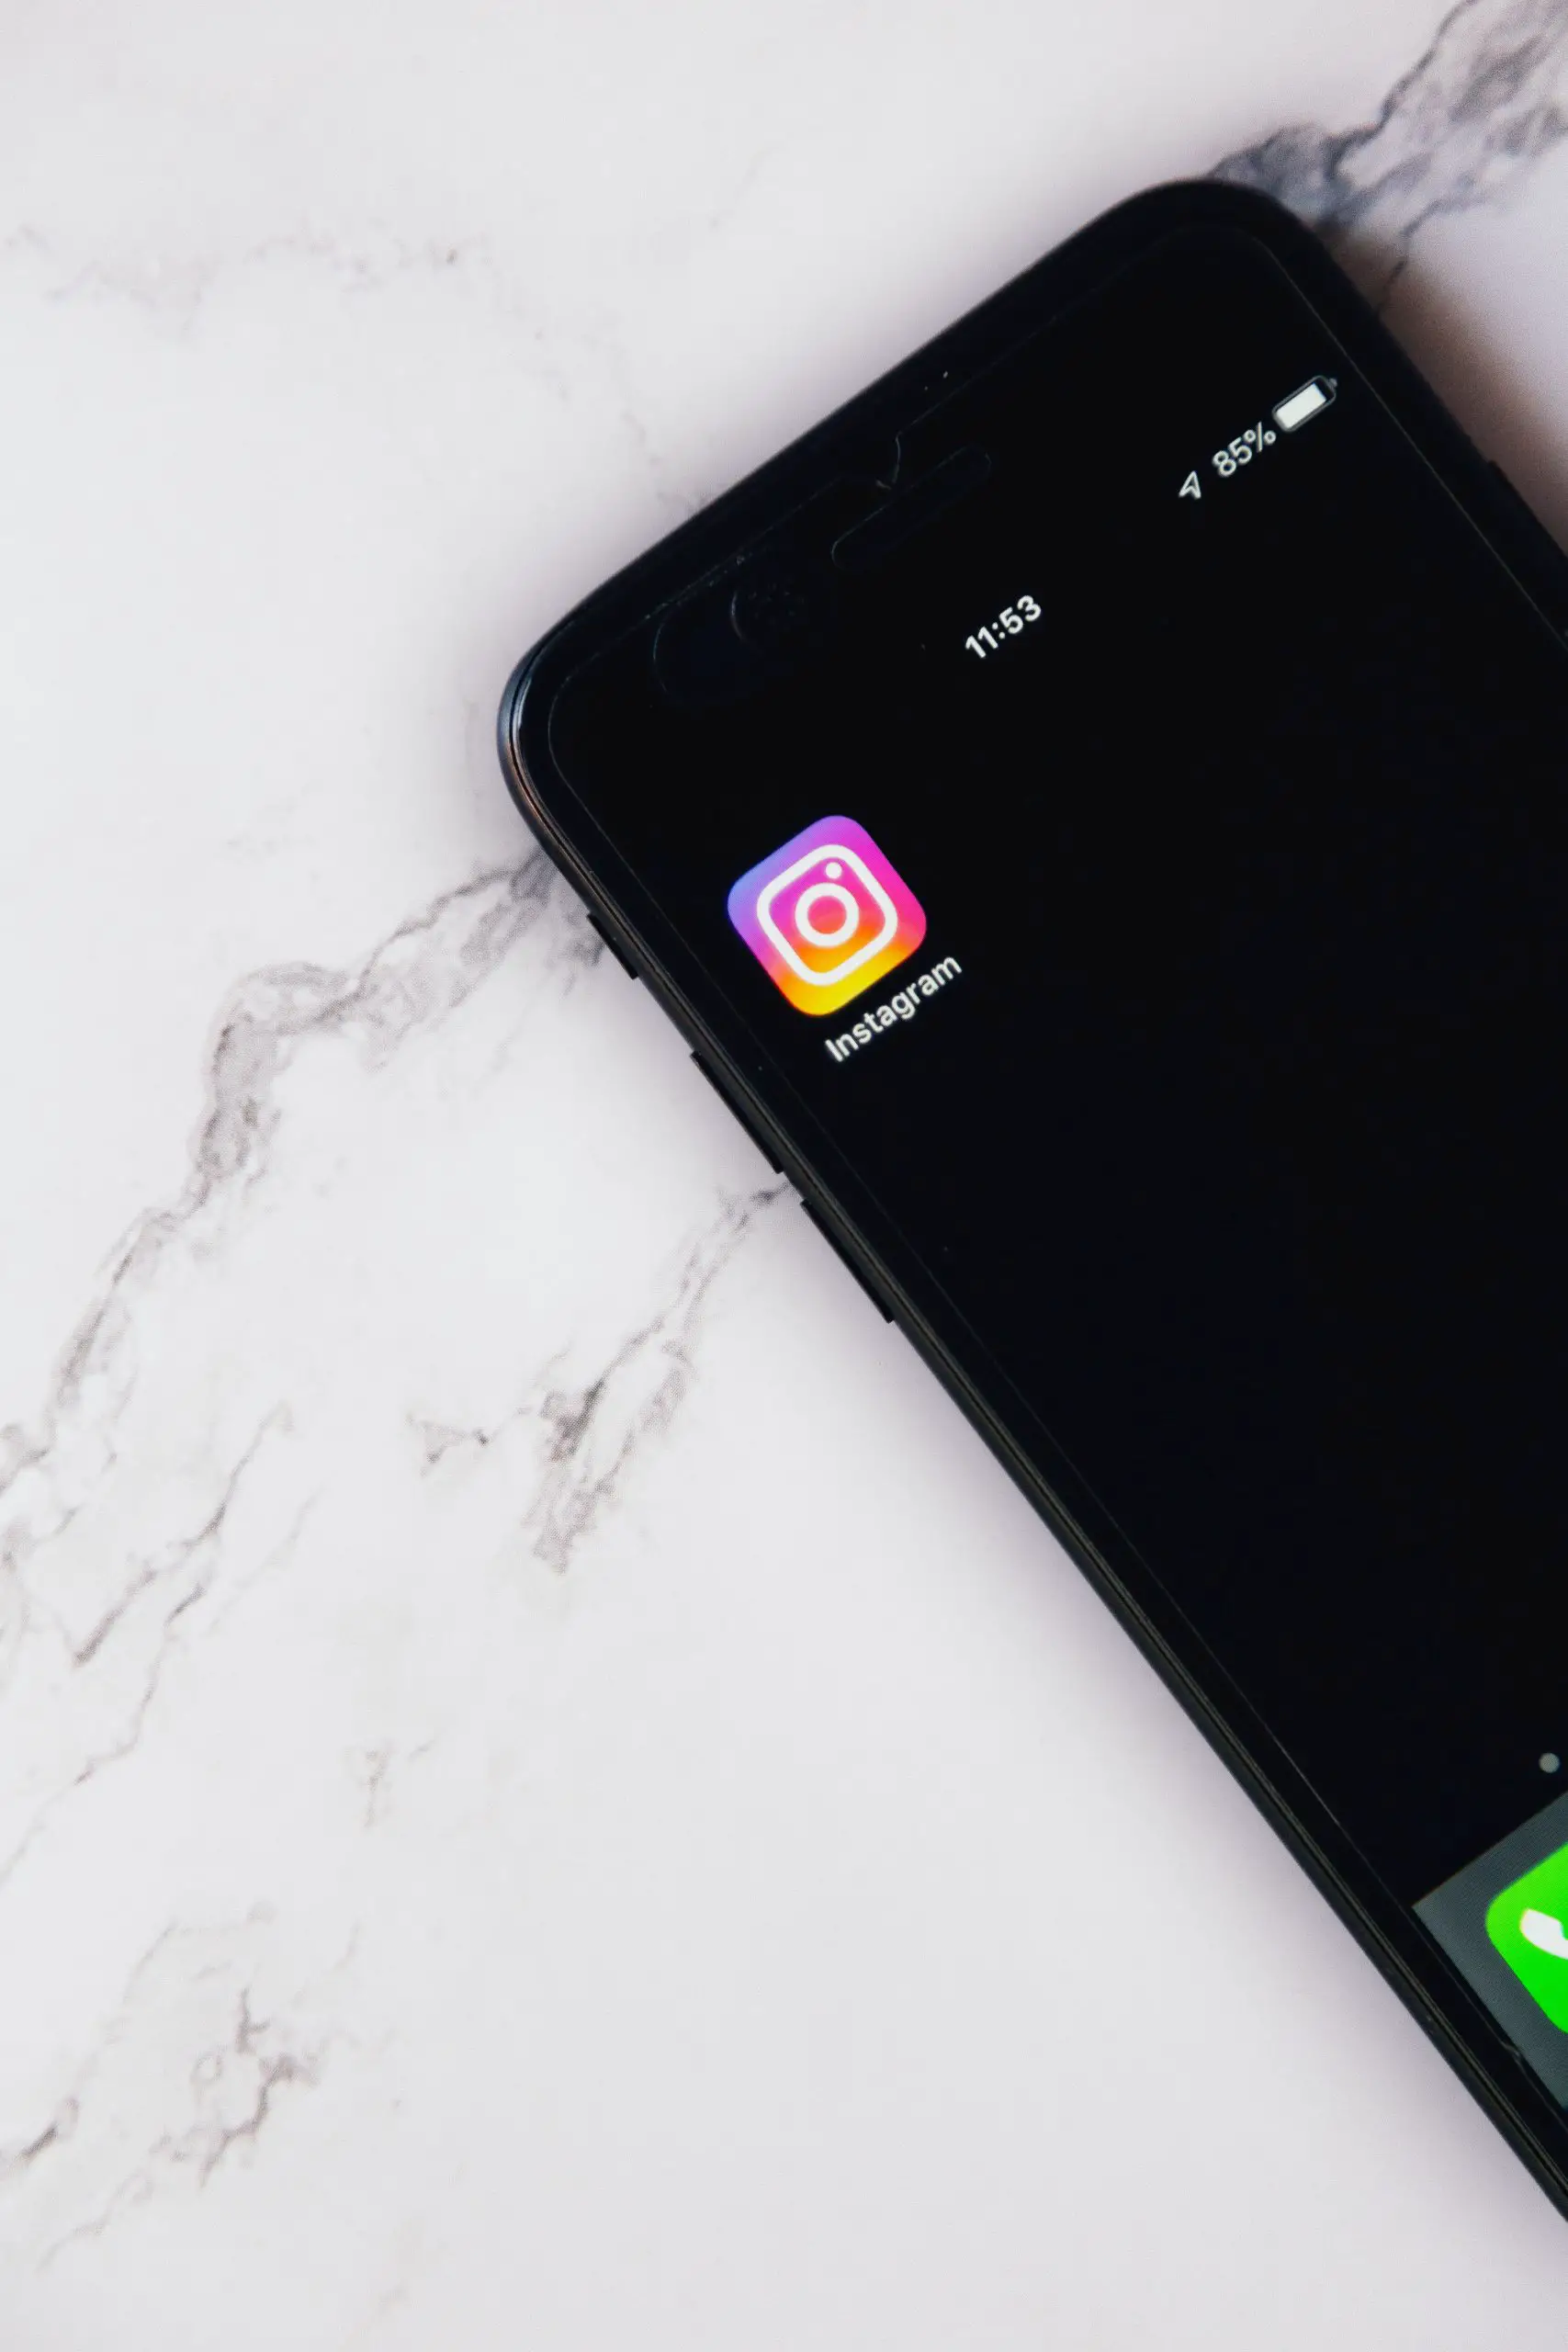 Shadowbanned On Instagram Test (2022): How To Tell If You Are Shadowbanned